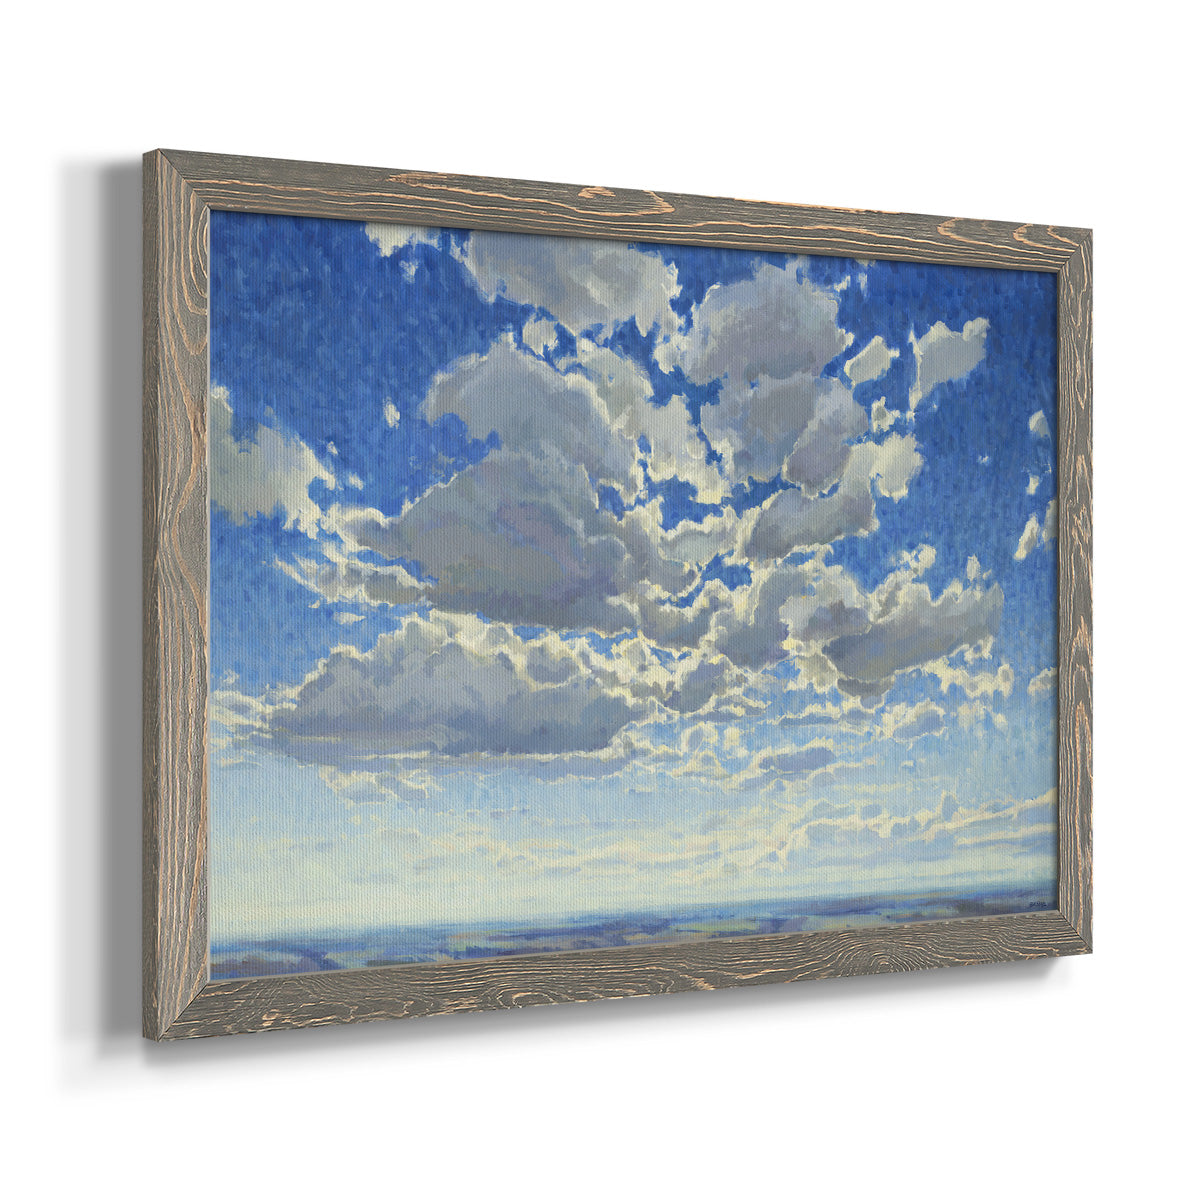 UBRM165-Premium Framed Canvas - Ready to Hang